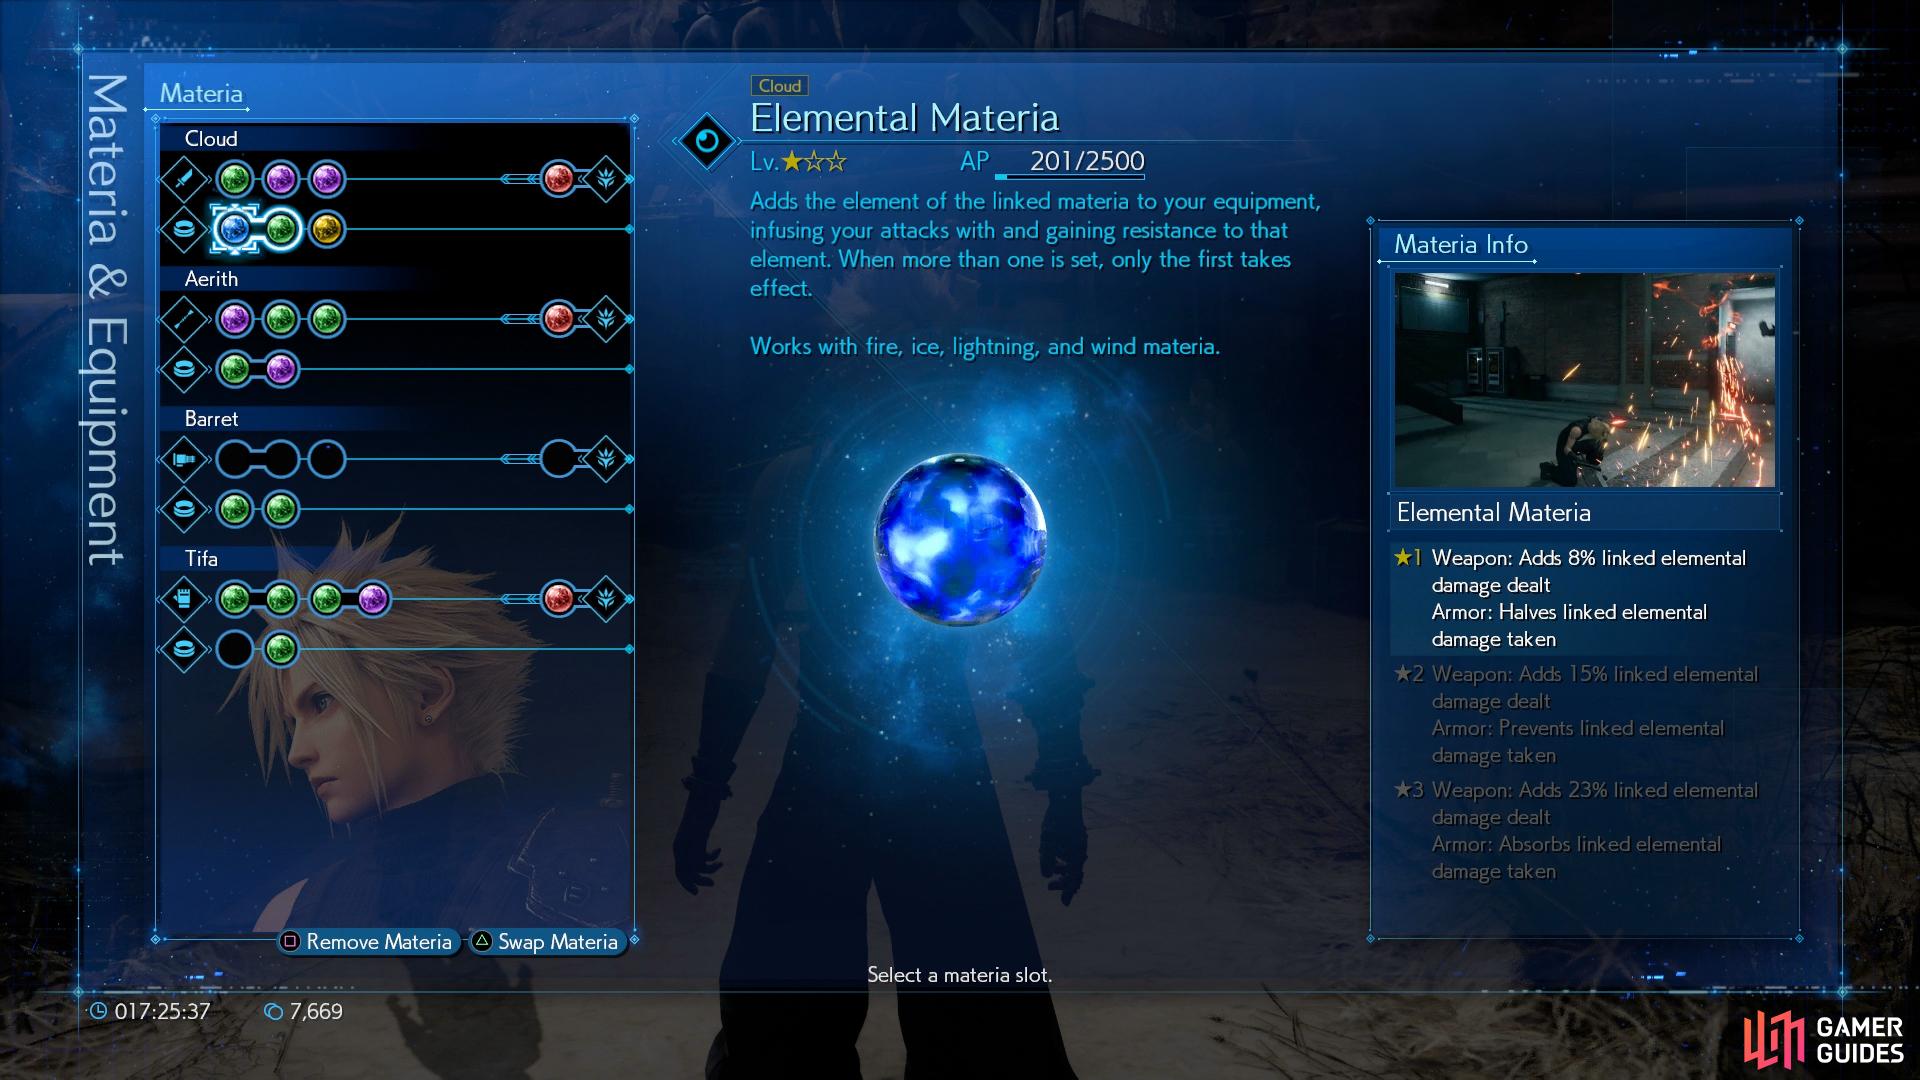 Equip Elemental-Ice to Cloud's Armor to decrease damage from Shiva's attacks